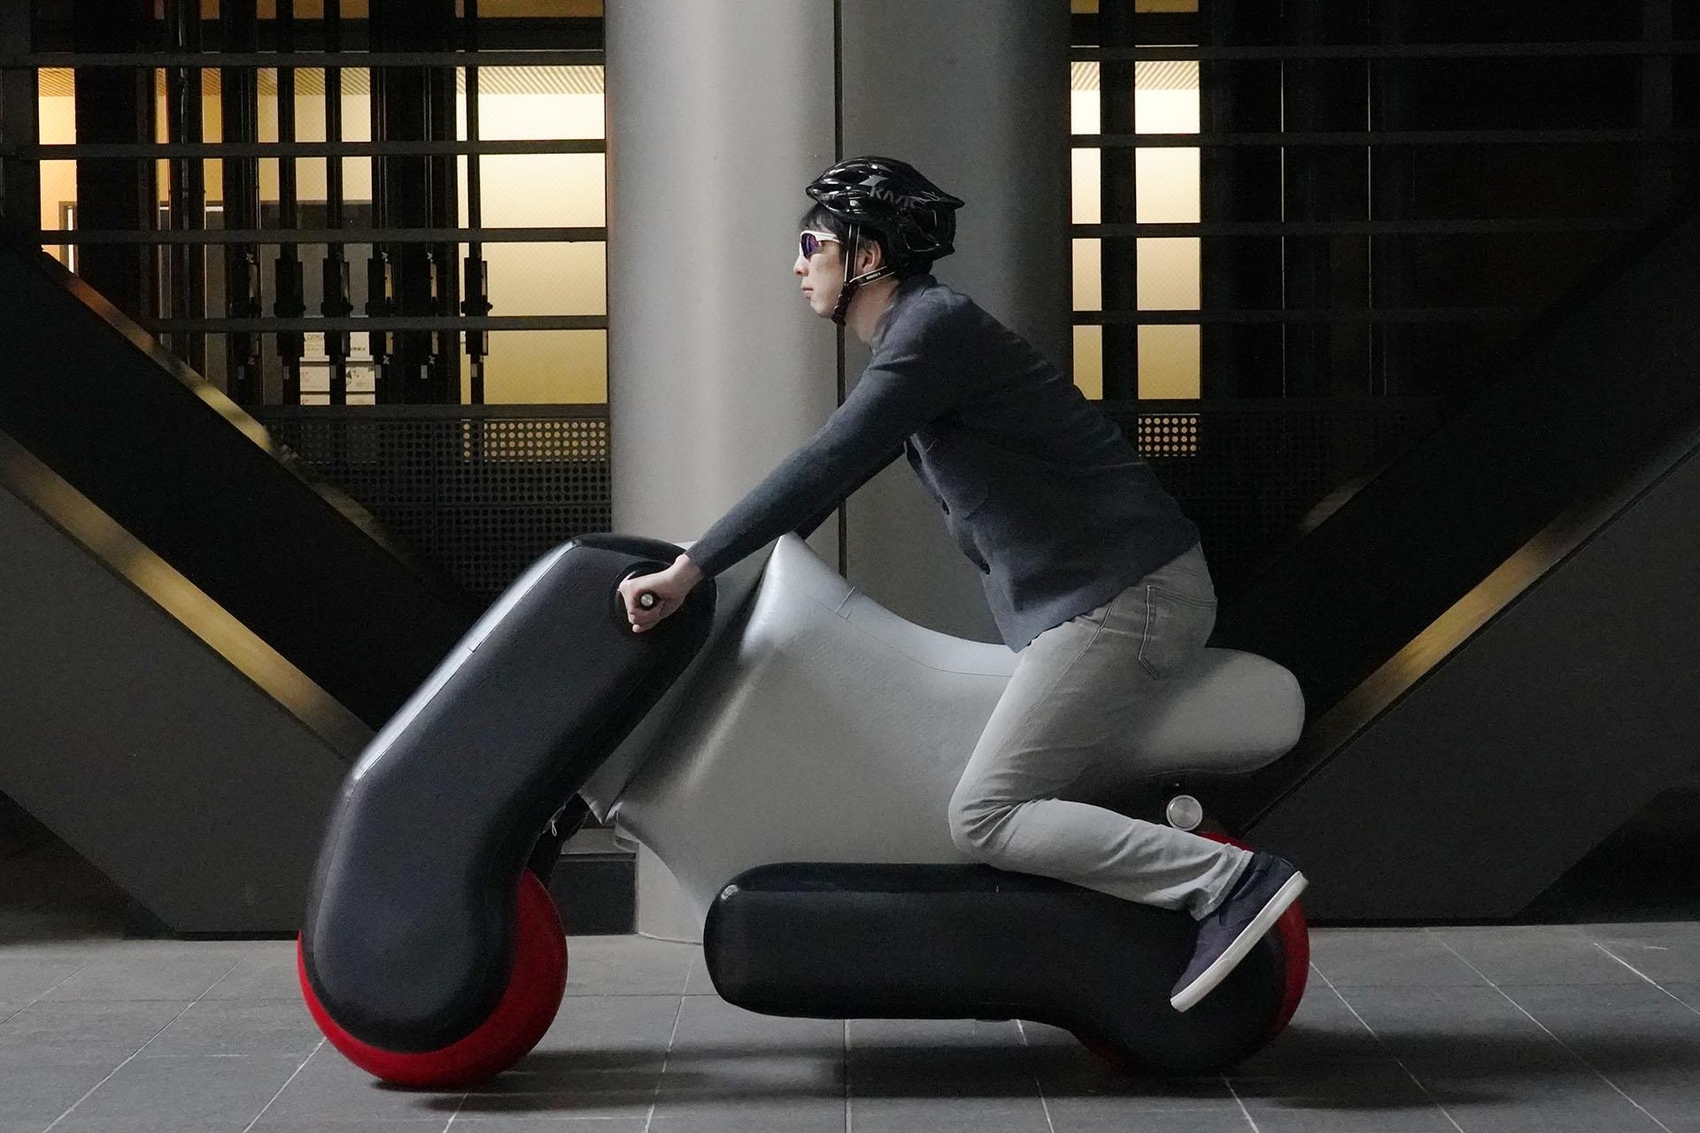 Poimo inflatable personal mobility device, jointly researched by the University of Tokyo and mercari R4D, adopted for international user interface symposium UIST 2020